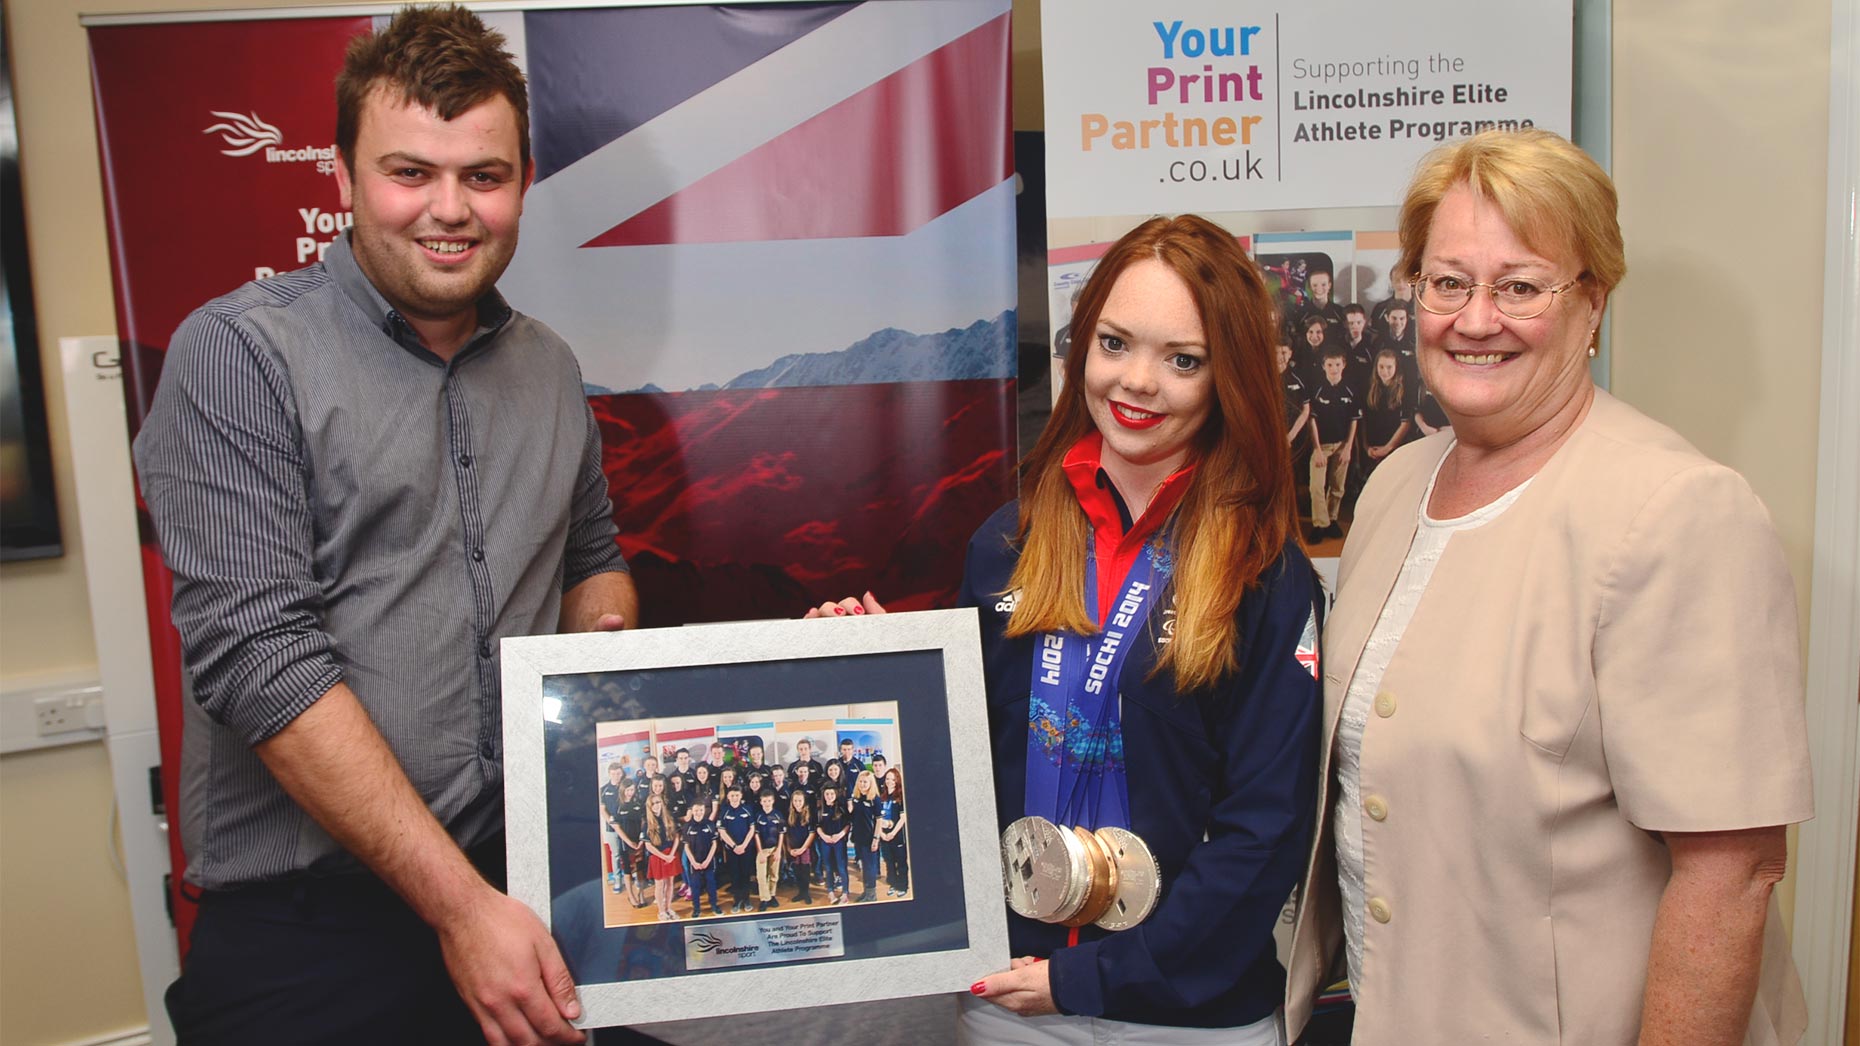 Jade was presented with a gift from Your Print Partner and Lincolnshire Elite Athlete Programme. Photo: Steve Smailes for The Lincolnite